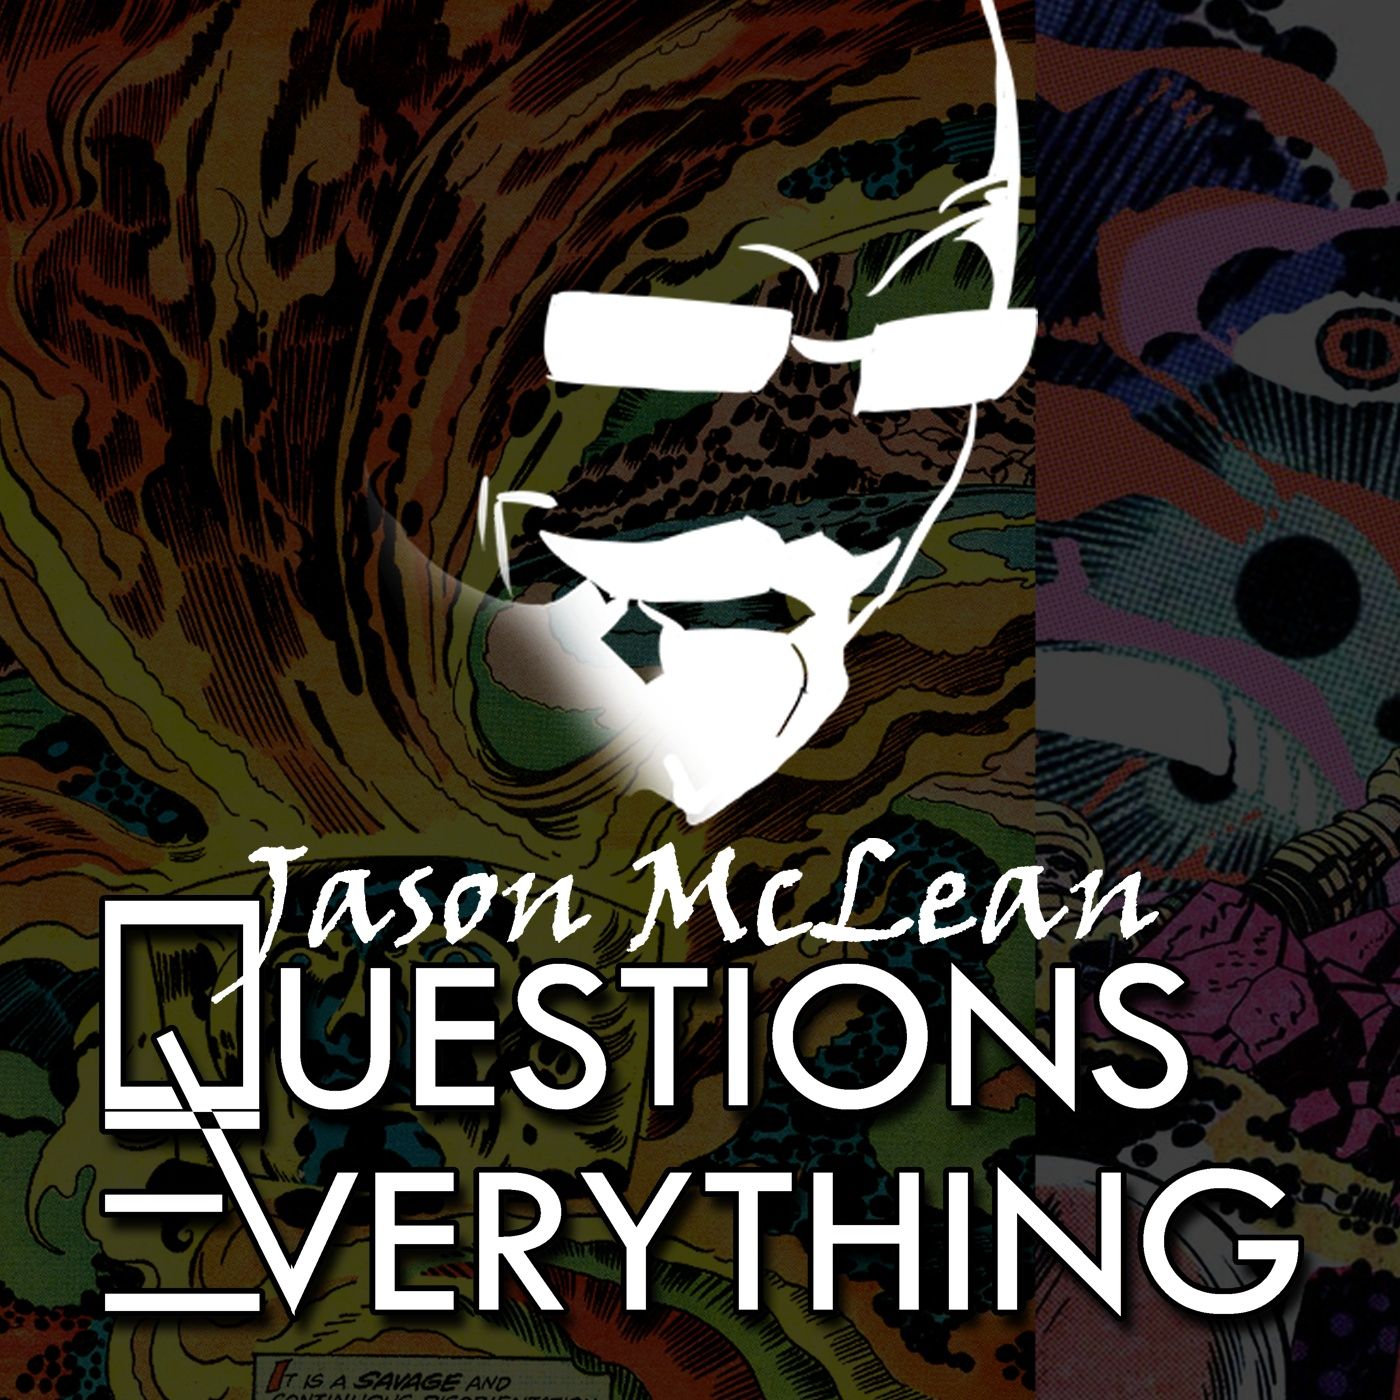 Jason McLean Questions Everything